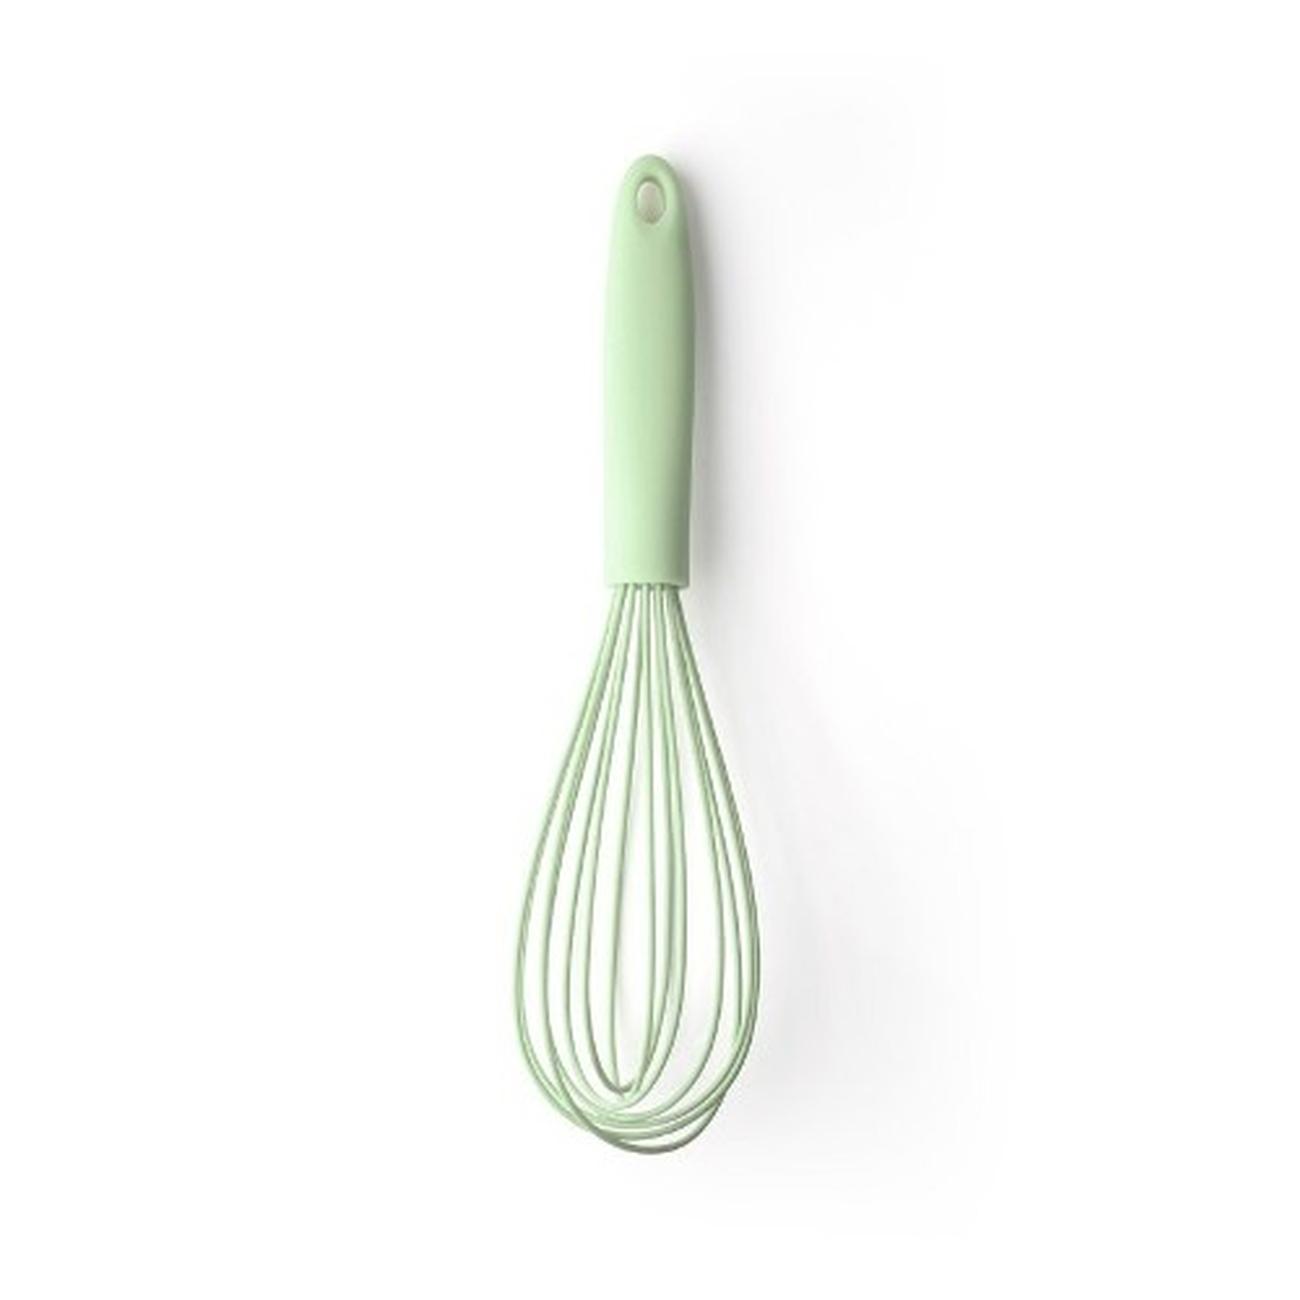 te-witness-lichen-silicone-whisk - Taylor's Eye Witness Lichen Silicone Whisk